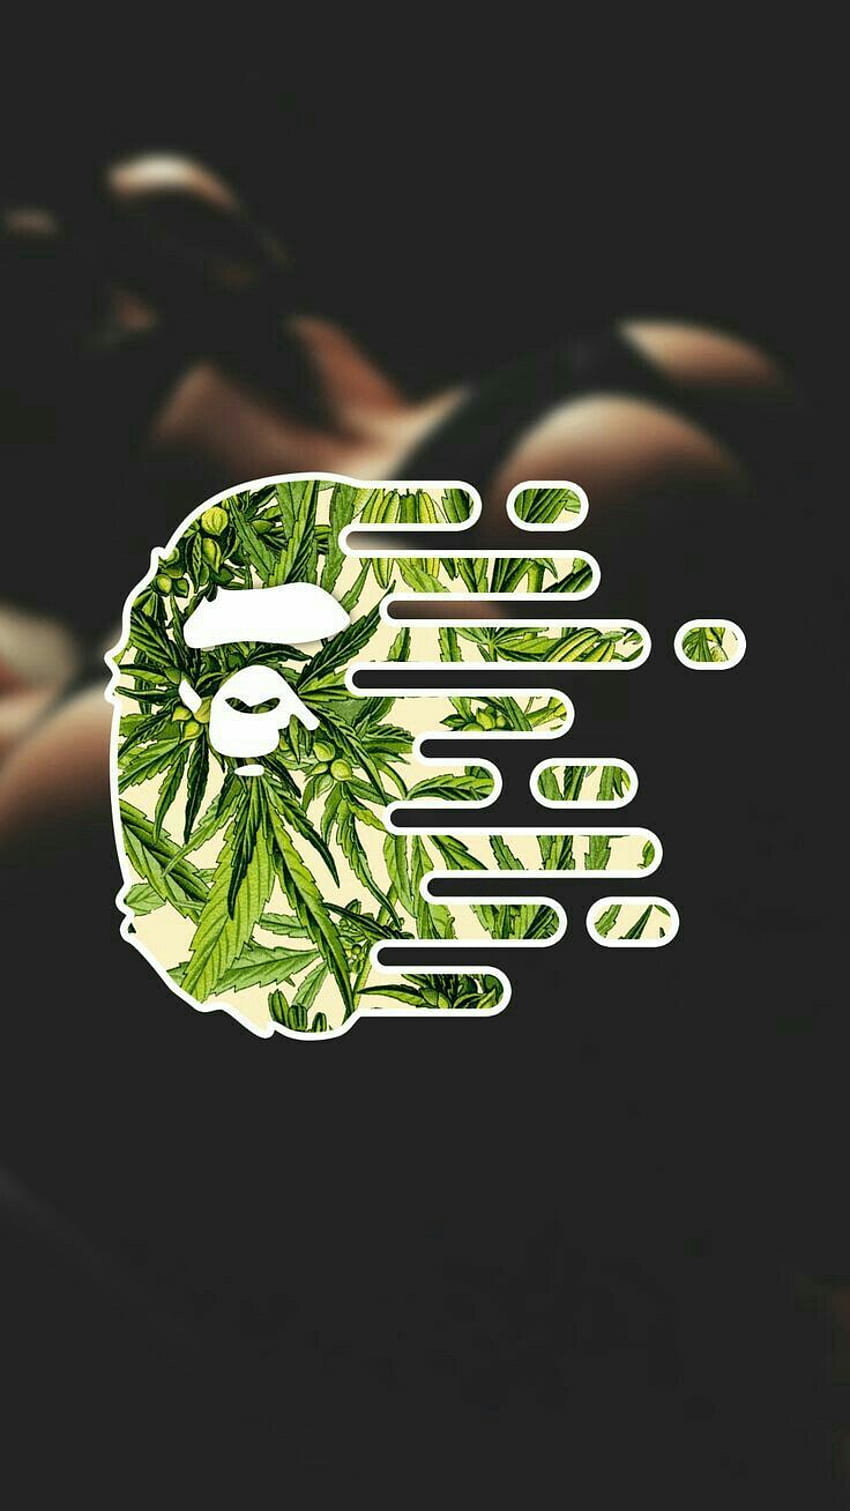 LifesRemix 23 On Weed Drugs Fucked Up Shit, Dope Weed HD phone wallpaper